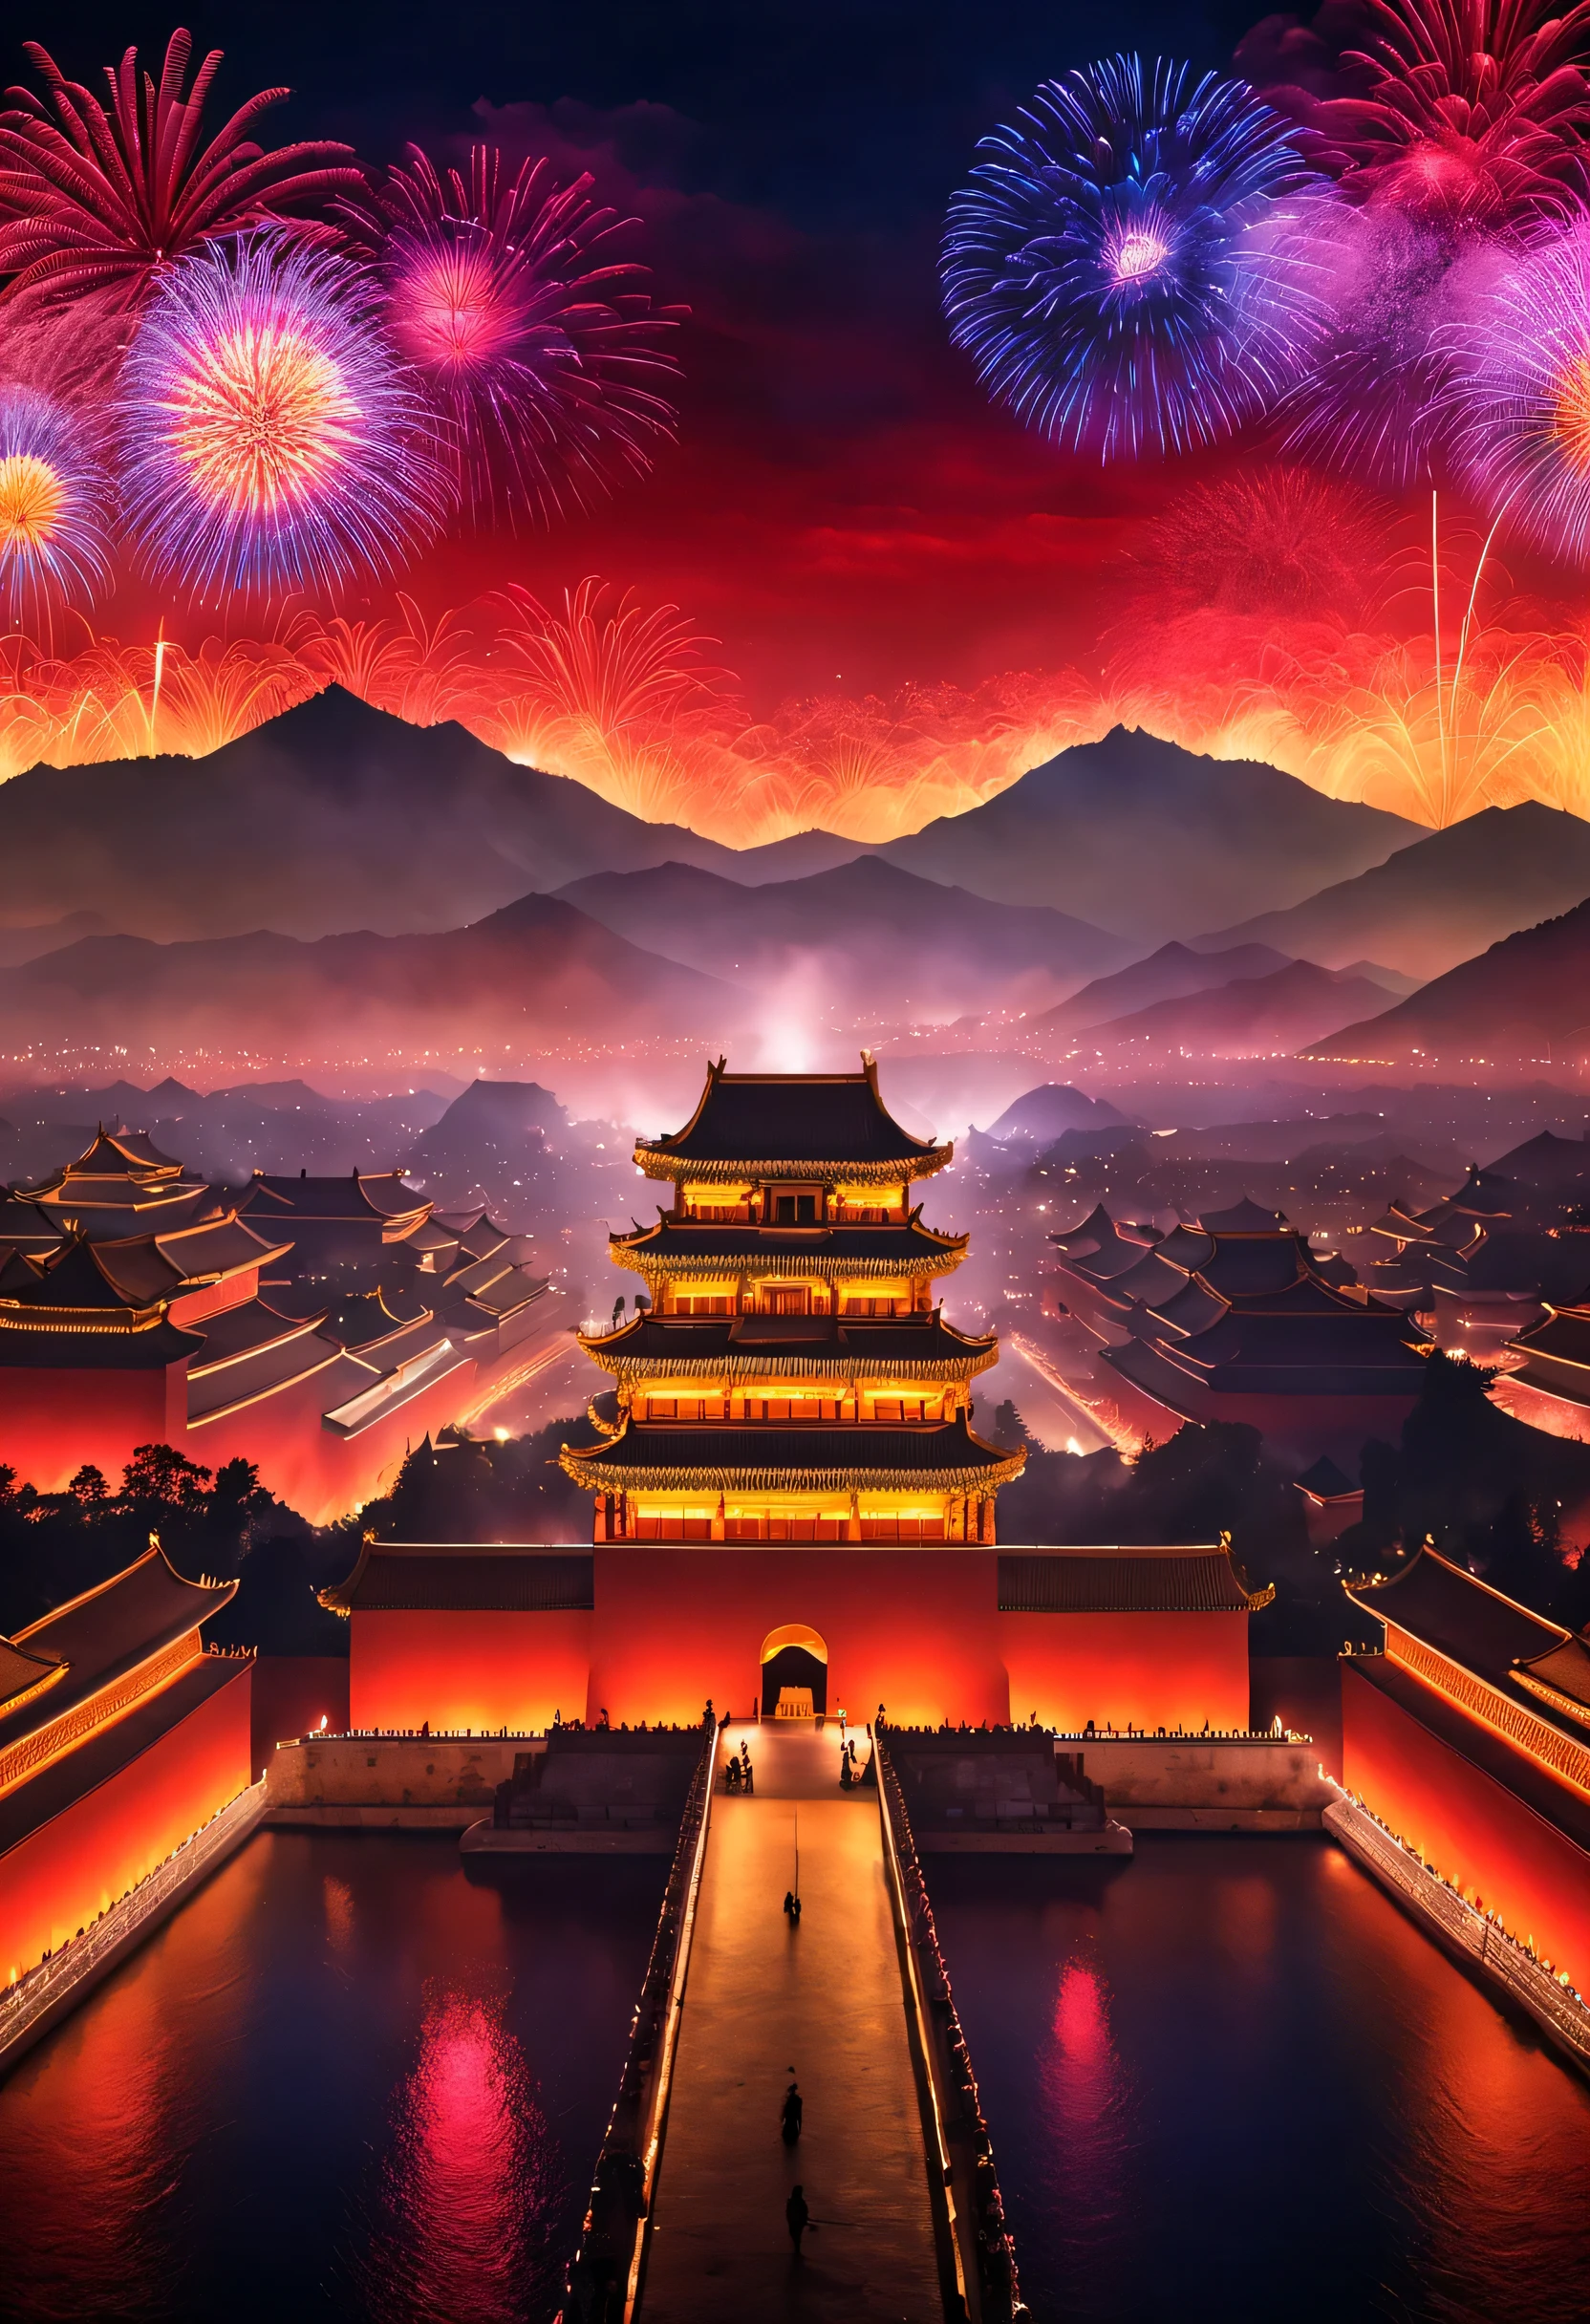 （giant projection《Thousands of miles of rivers and mountains》On the red wall of the Forbidden City in China），Huge LED screen，Inspired by Wang Ximeng of the Northern Song Dynasty《Thousands of miles of rivers and mountains map》volumetr，Light show，Fireworks bloom in the sky, Many ribbons and confetti fall in the air, (a happy new year)，everyone hopes，Tributes to Valerio Orgiatti,author：Shigeru Ban,Public places,Ray traching,globalillumination,colored lighting,modern, The content is very detailed, Best quality at best, tmasterpiece, A high resolution, photographyrealism, hyper realisitc, current, 8K,LED screen，high - tech，